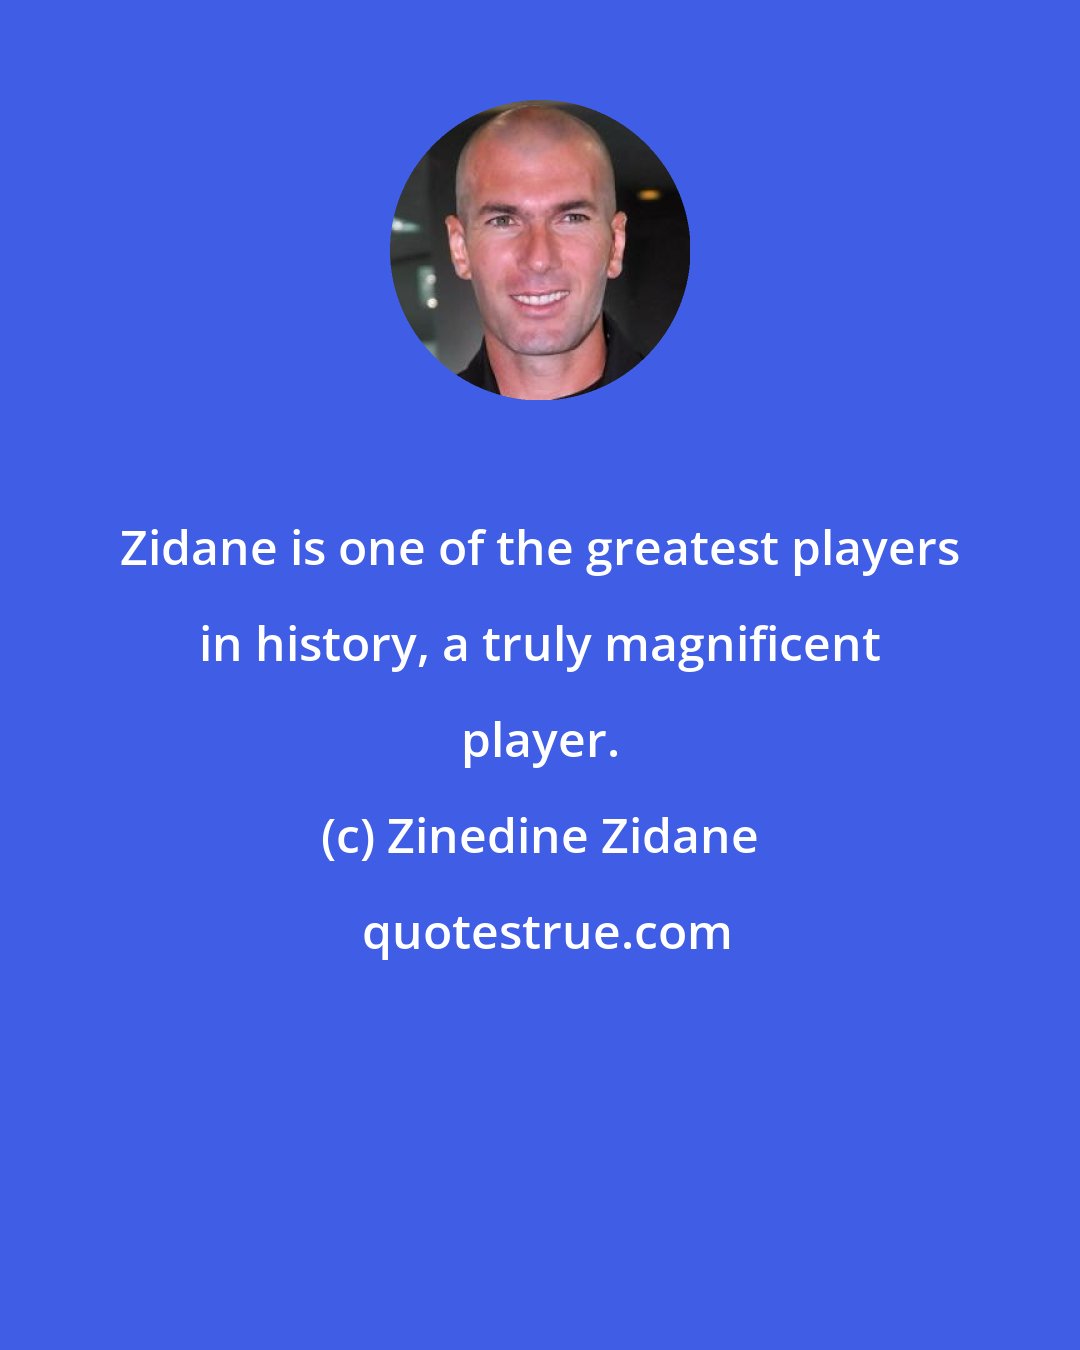 Zinedine Zidane: Zidane is one of the greatest players in history, a truly magnificent player.